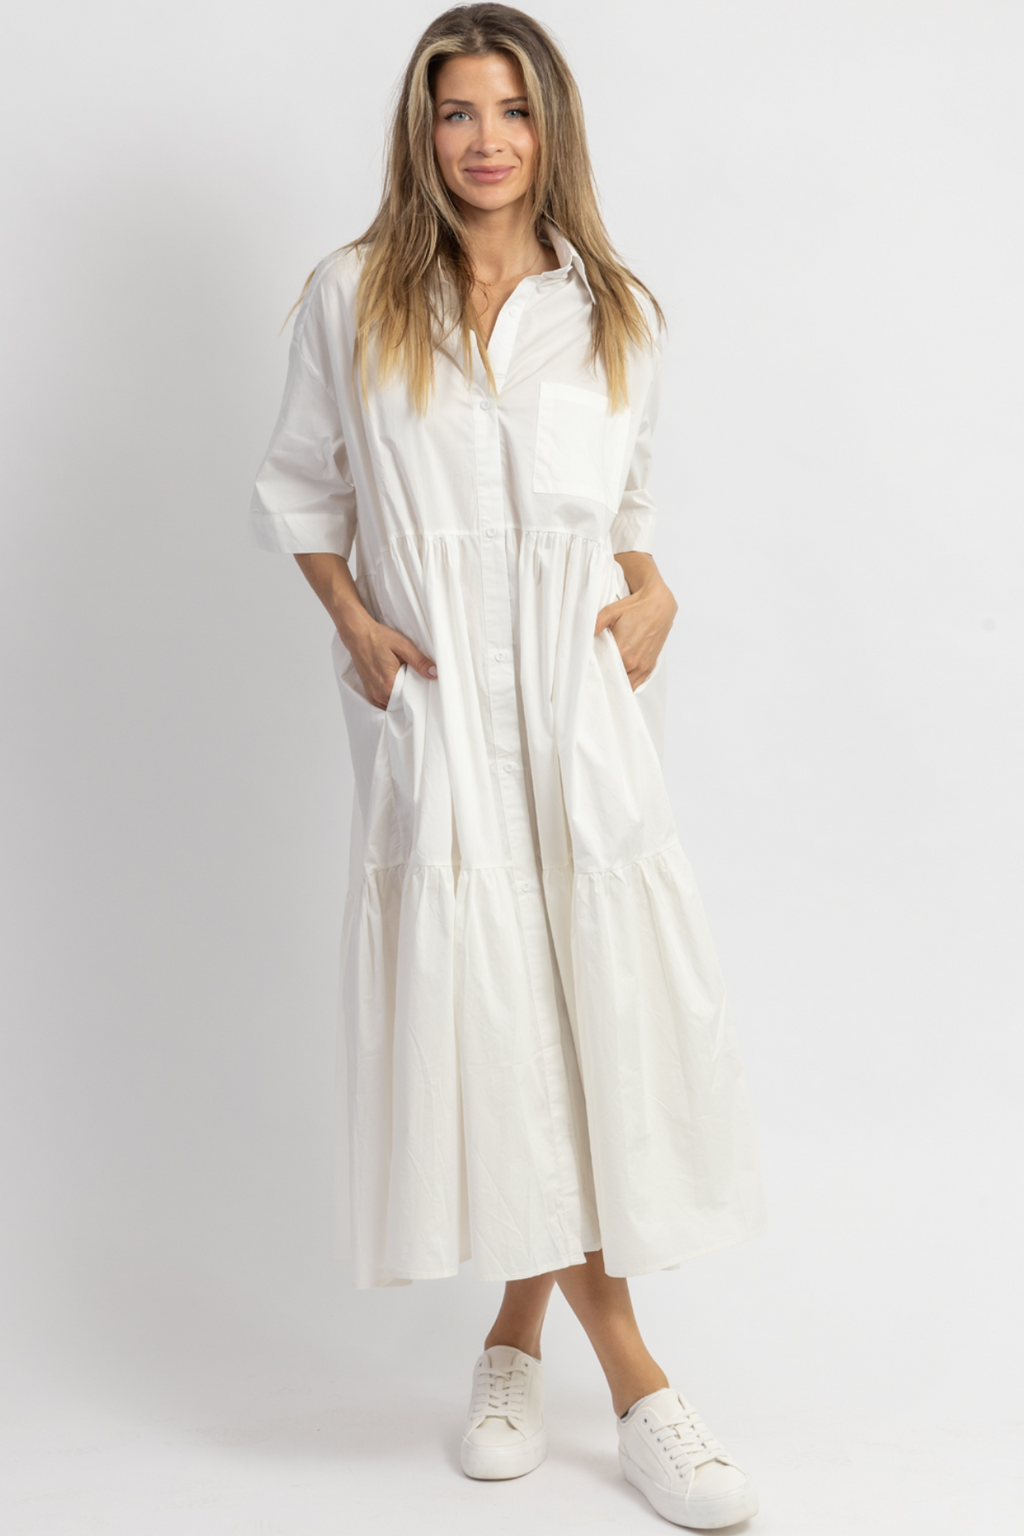 NOT A CLOUD WHITE TIERED DRESS